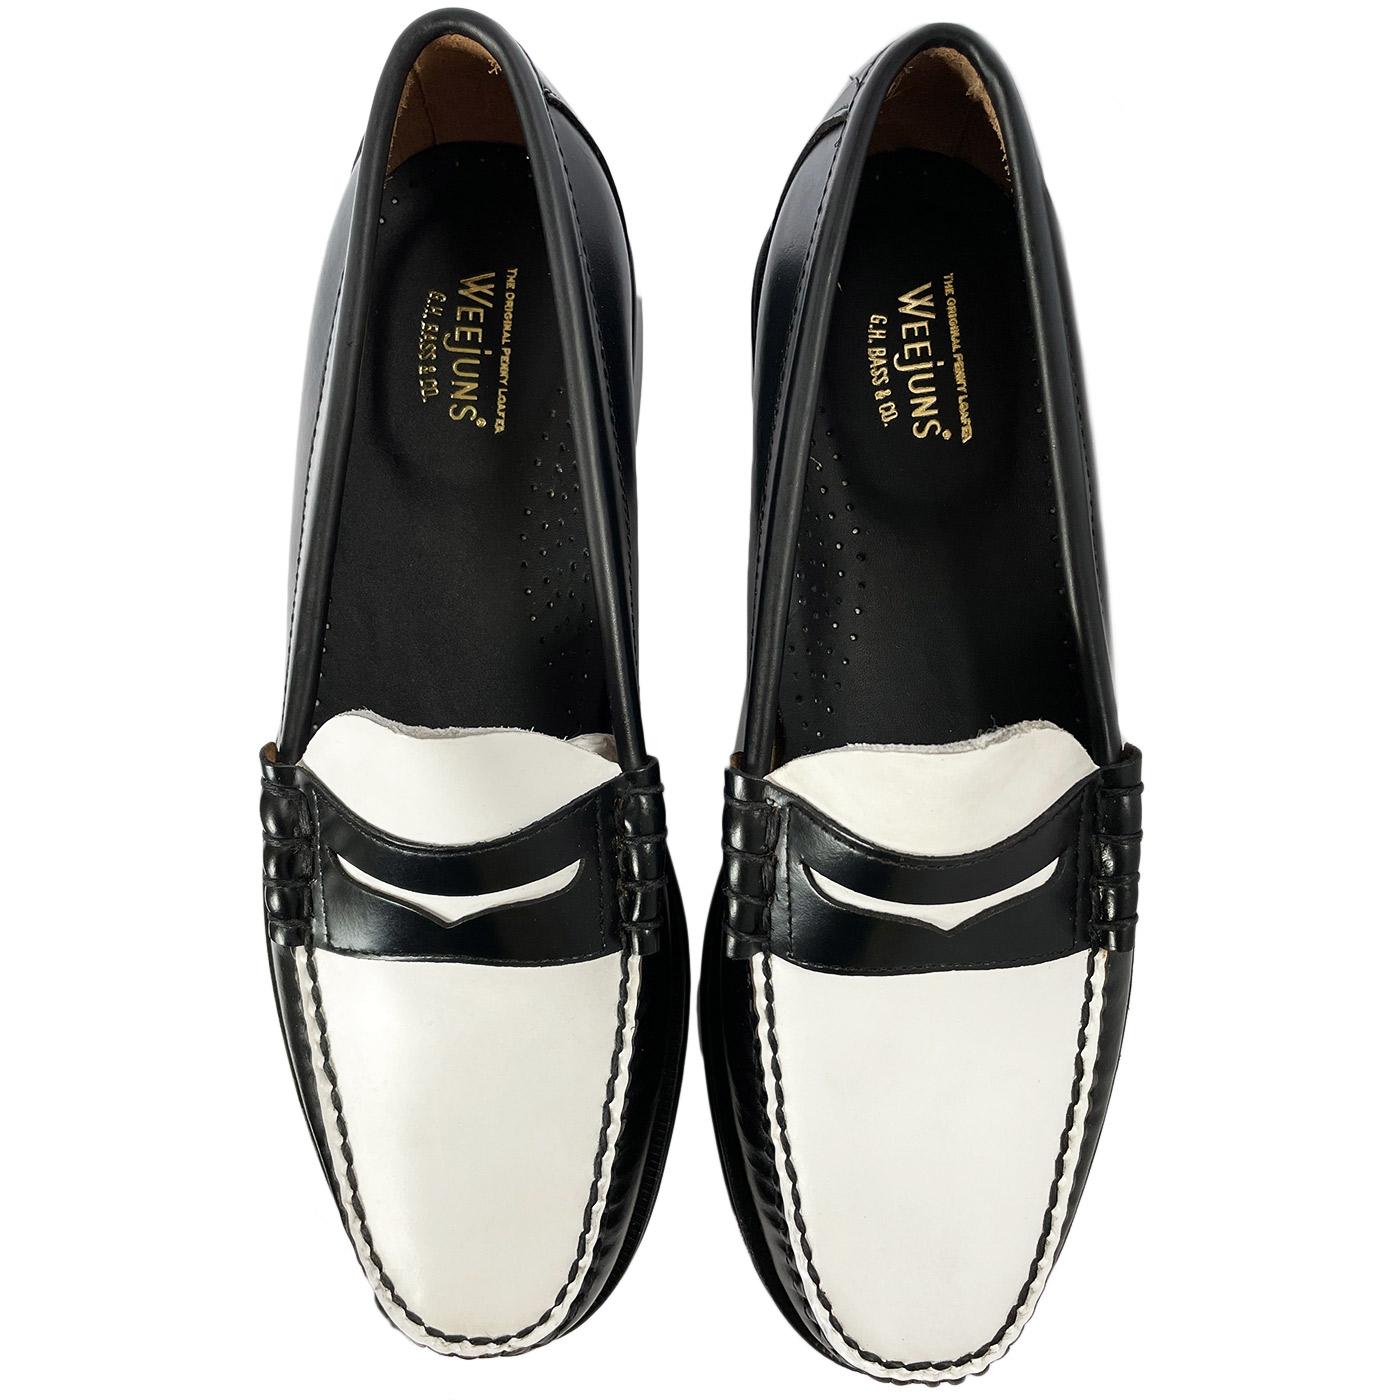 BASS WEEJUNS Larson 2 Tone Mod Penny Loafers Black/White